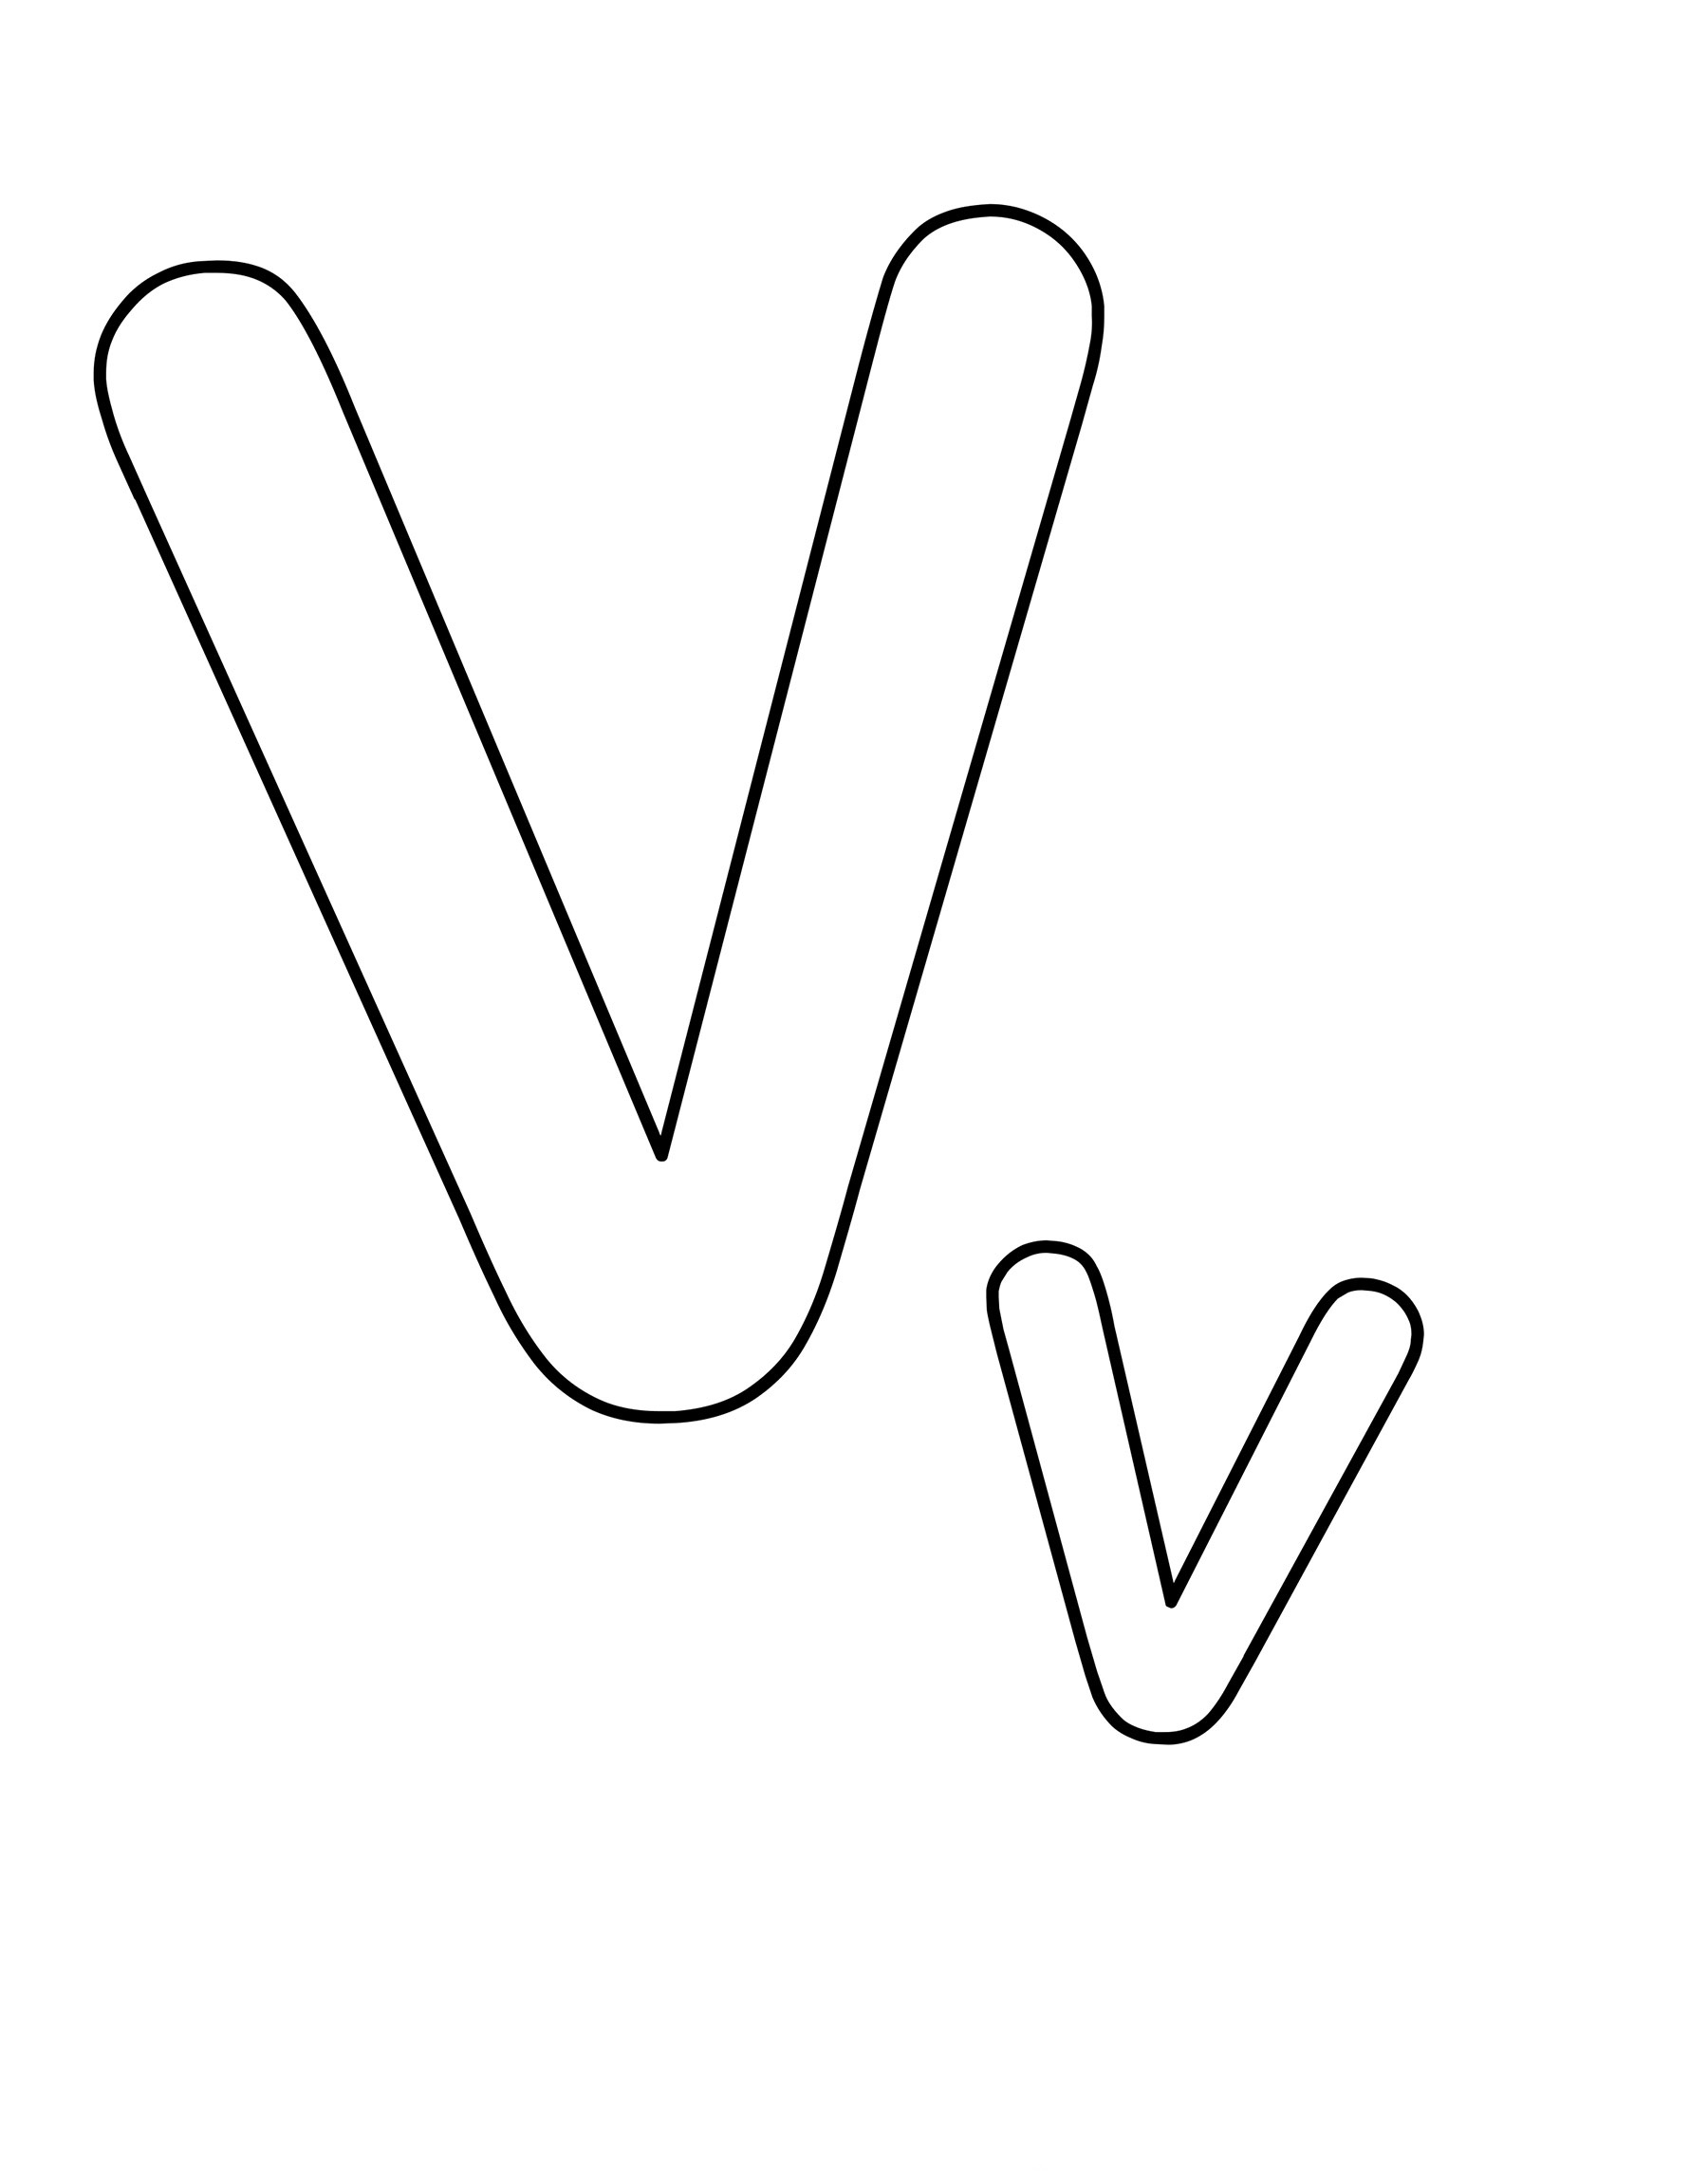 letter-v-coloring-pages-to-download-and-print-for-free